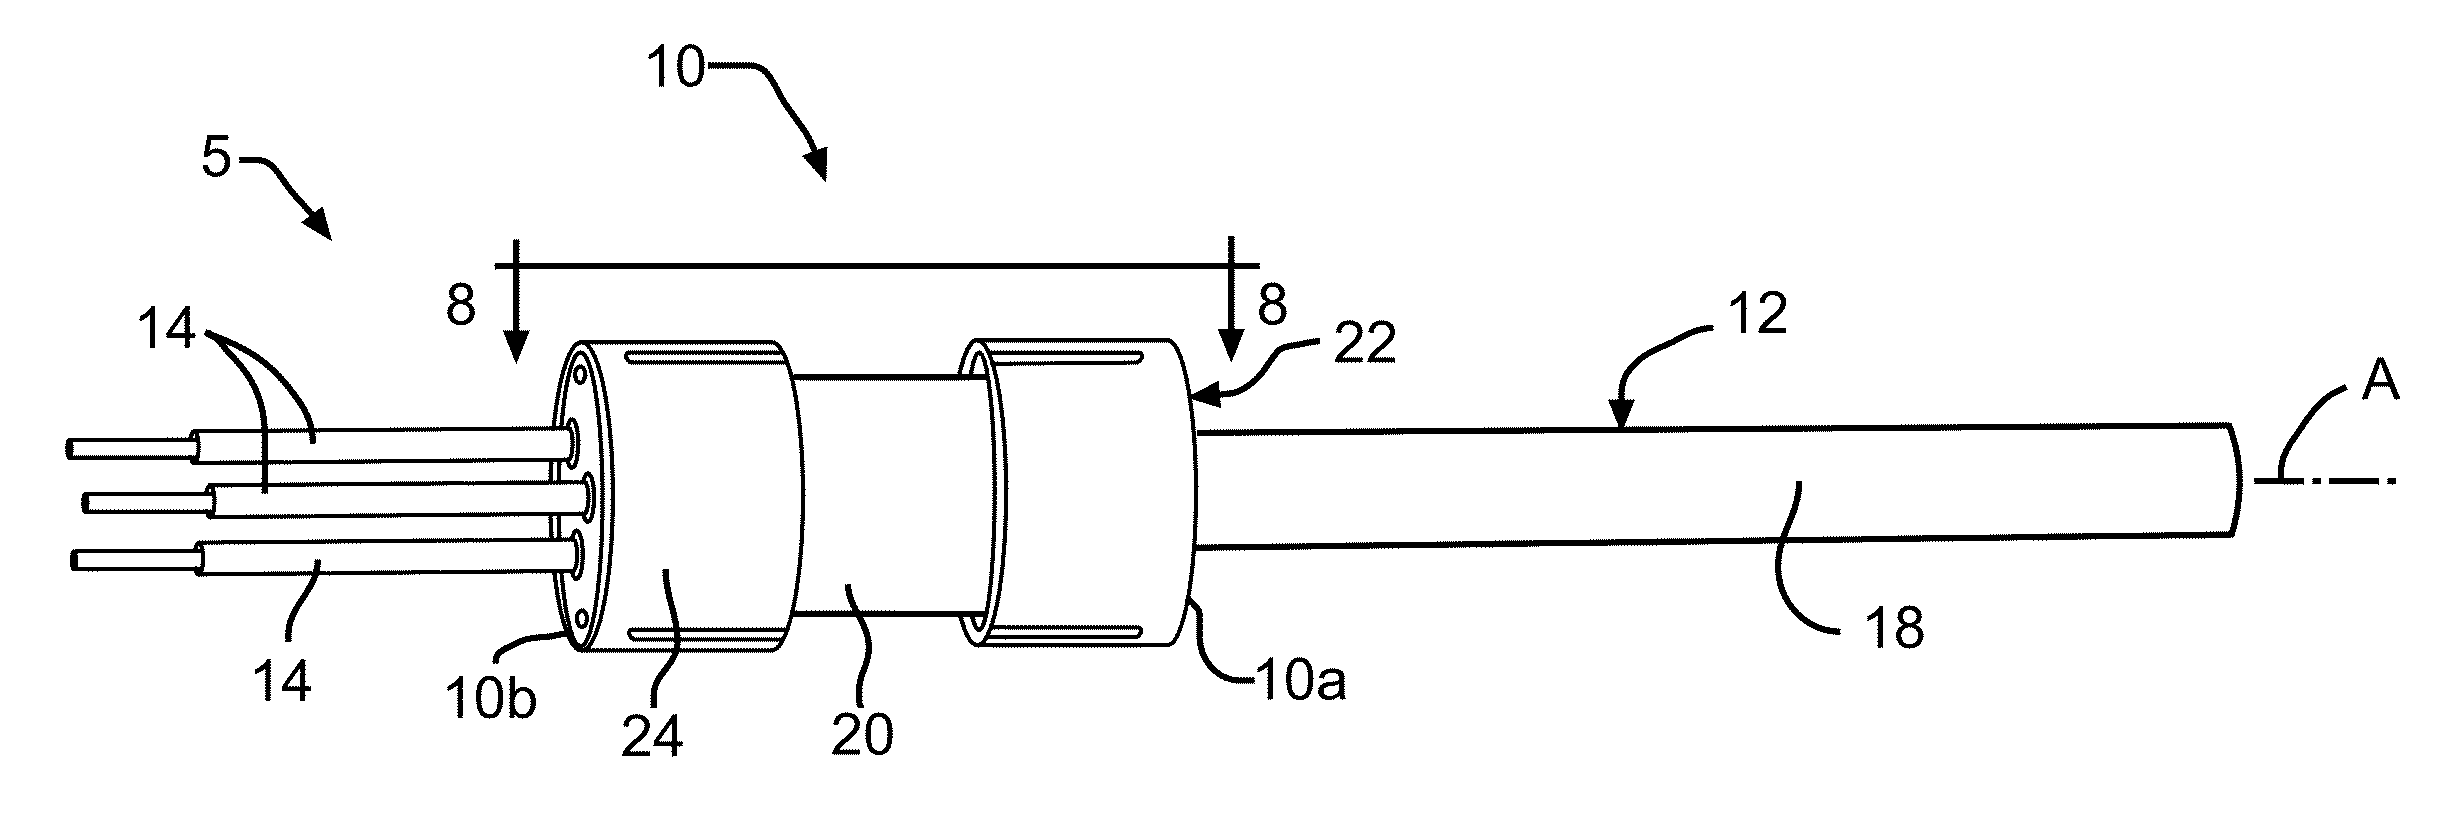 Electromagnetic Shield Termination Device